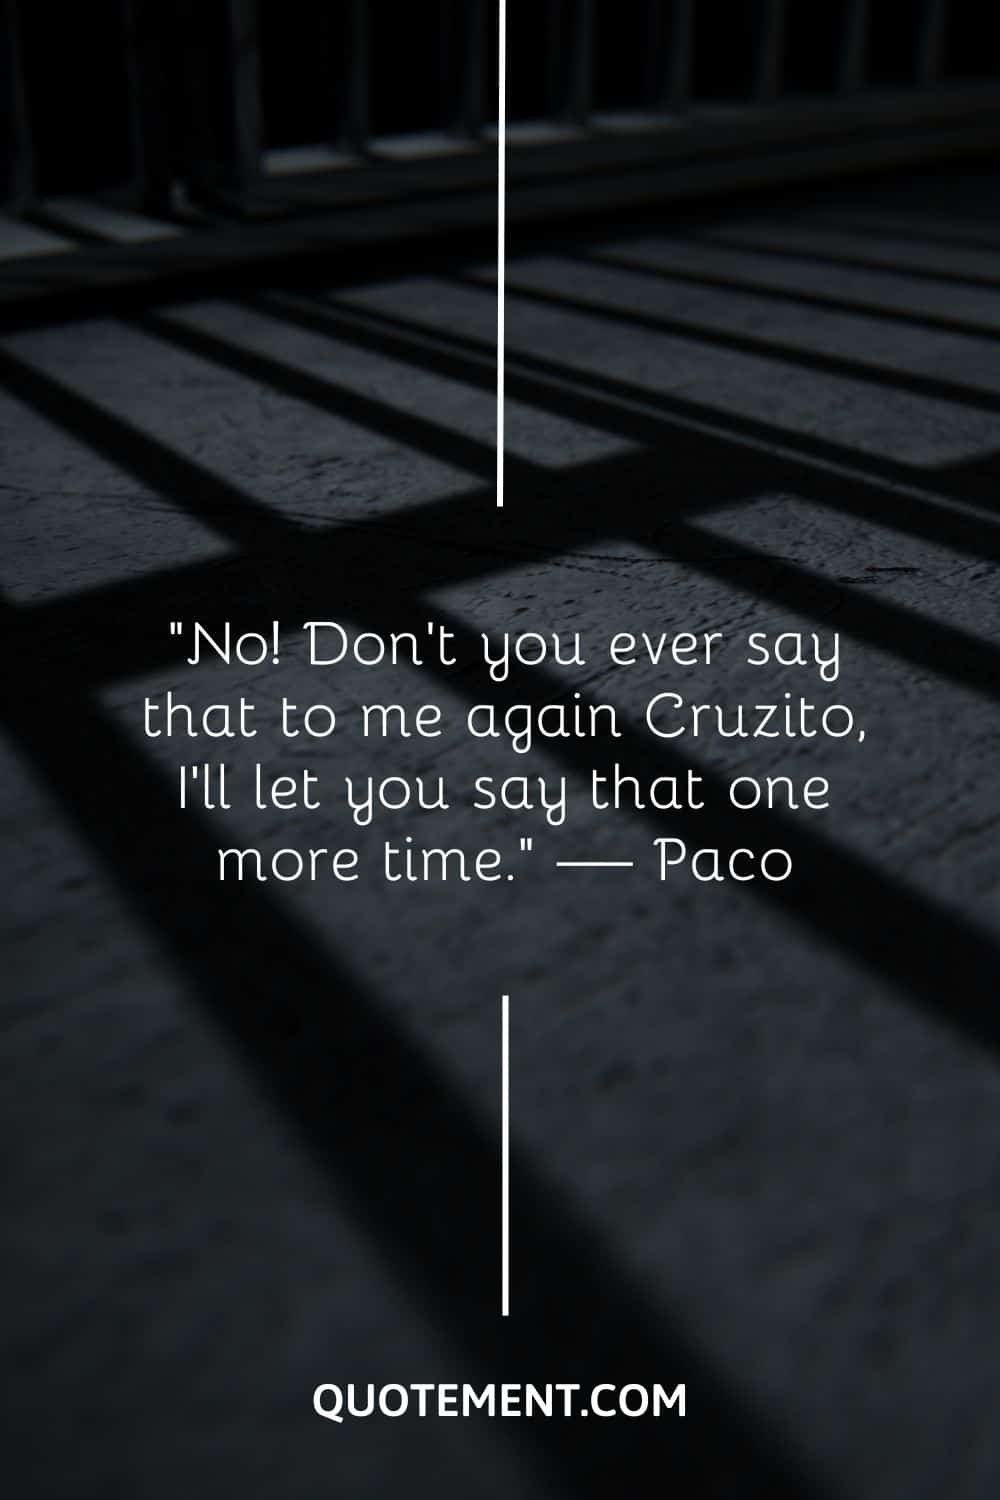 No! Don’t you ever say that to me again Cruzito, I’ll let you say that one more time